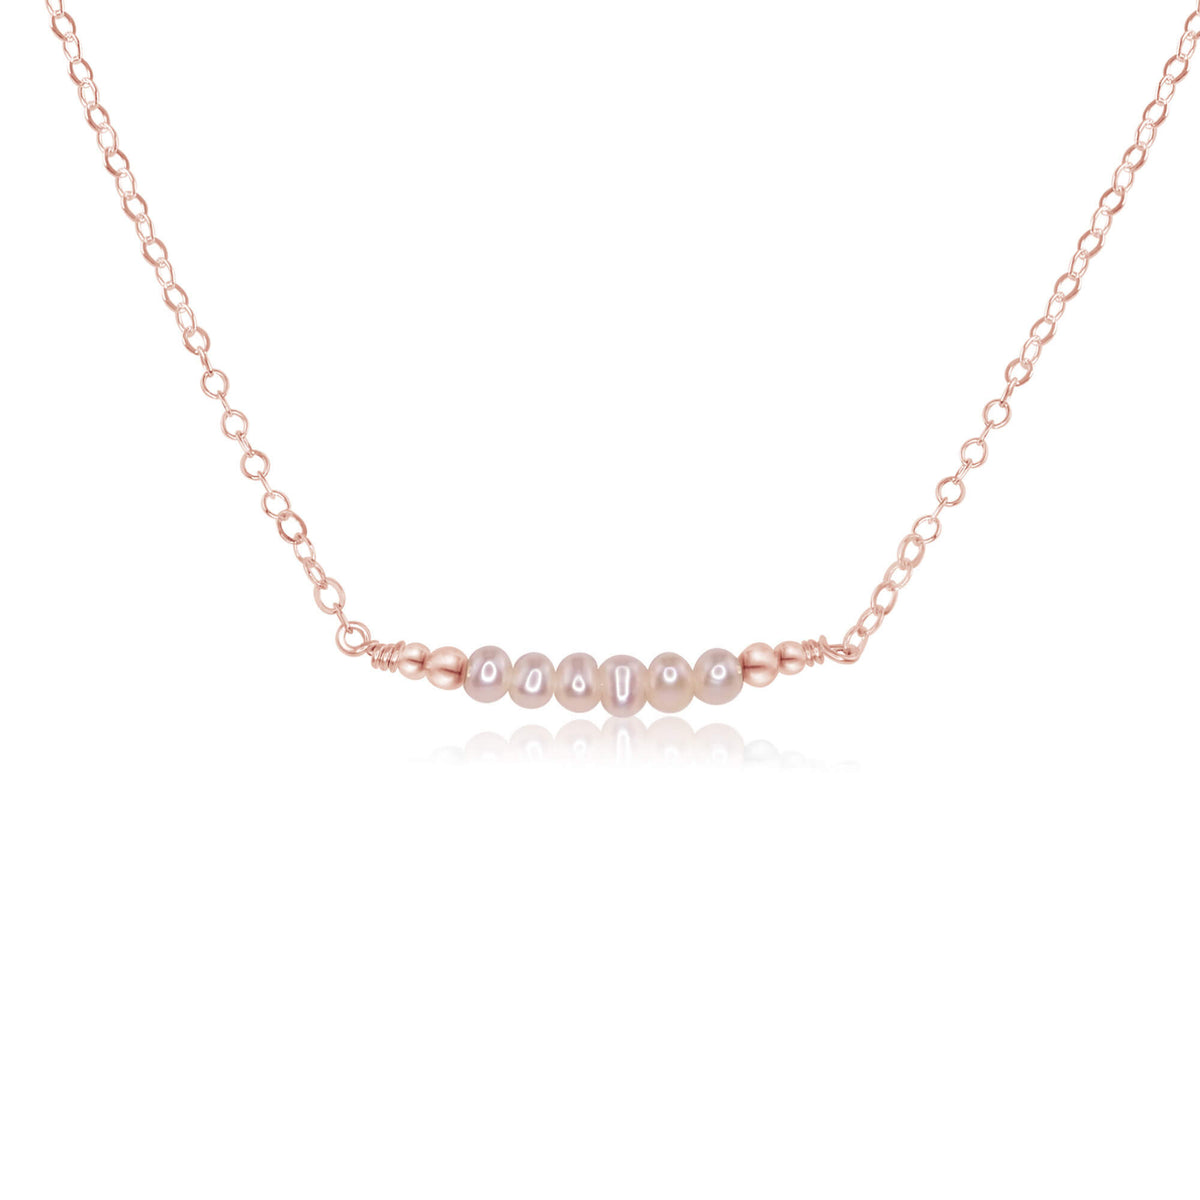 Faceted Bead Bar Necklace - Freshwater Pearl - 14K Rose Gold Fill - Luna Tide Handmade Jewellery